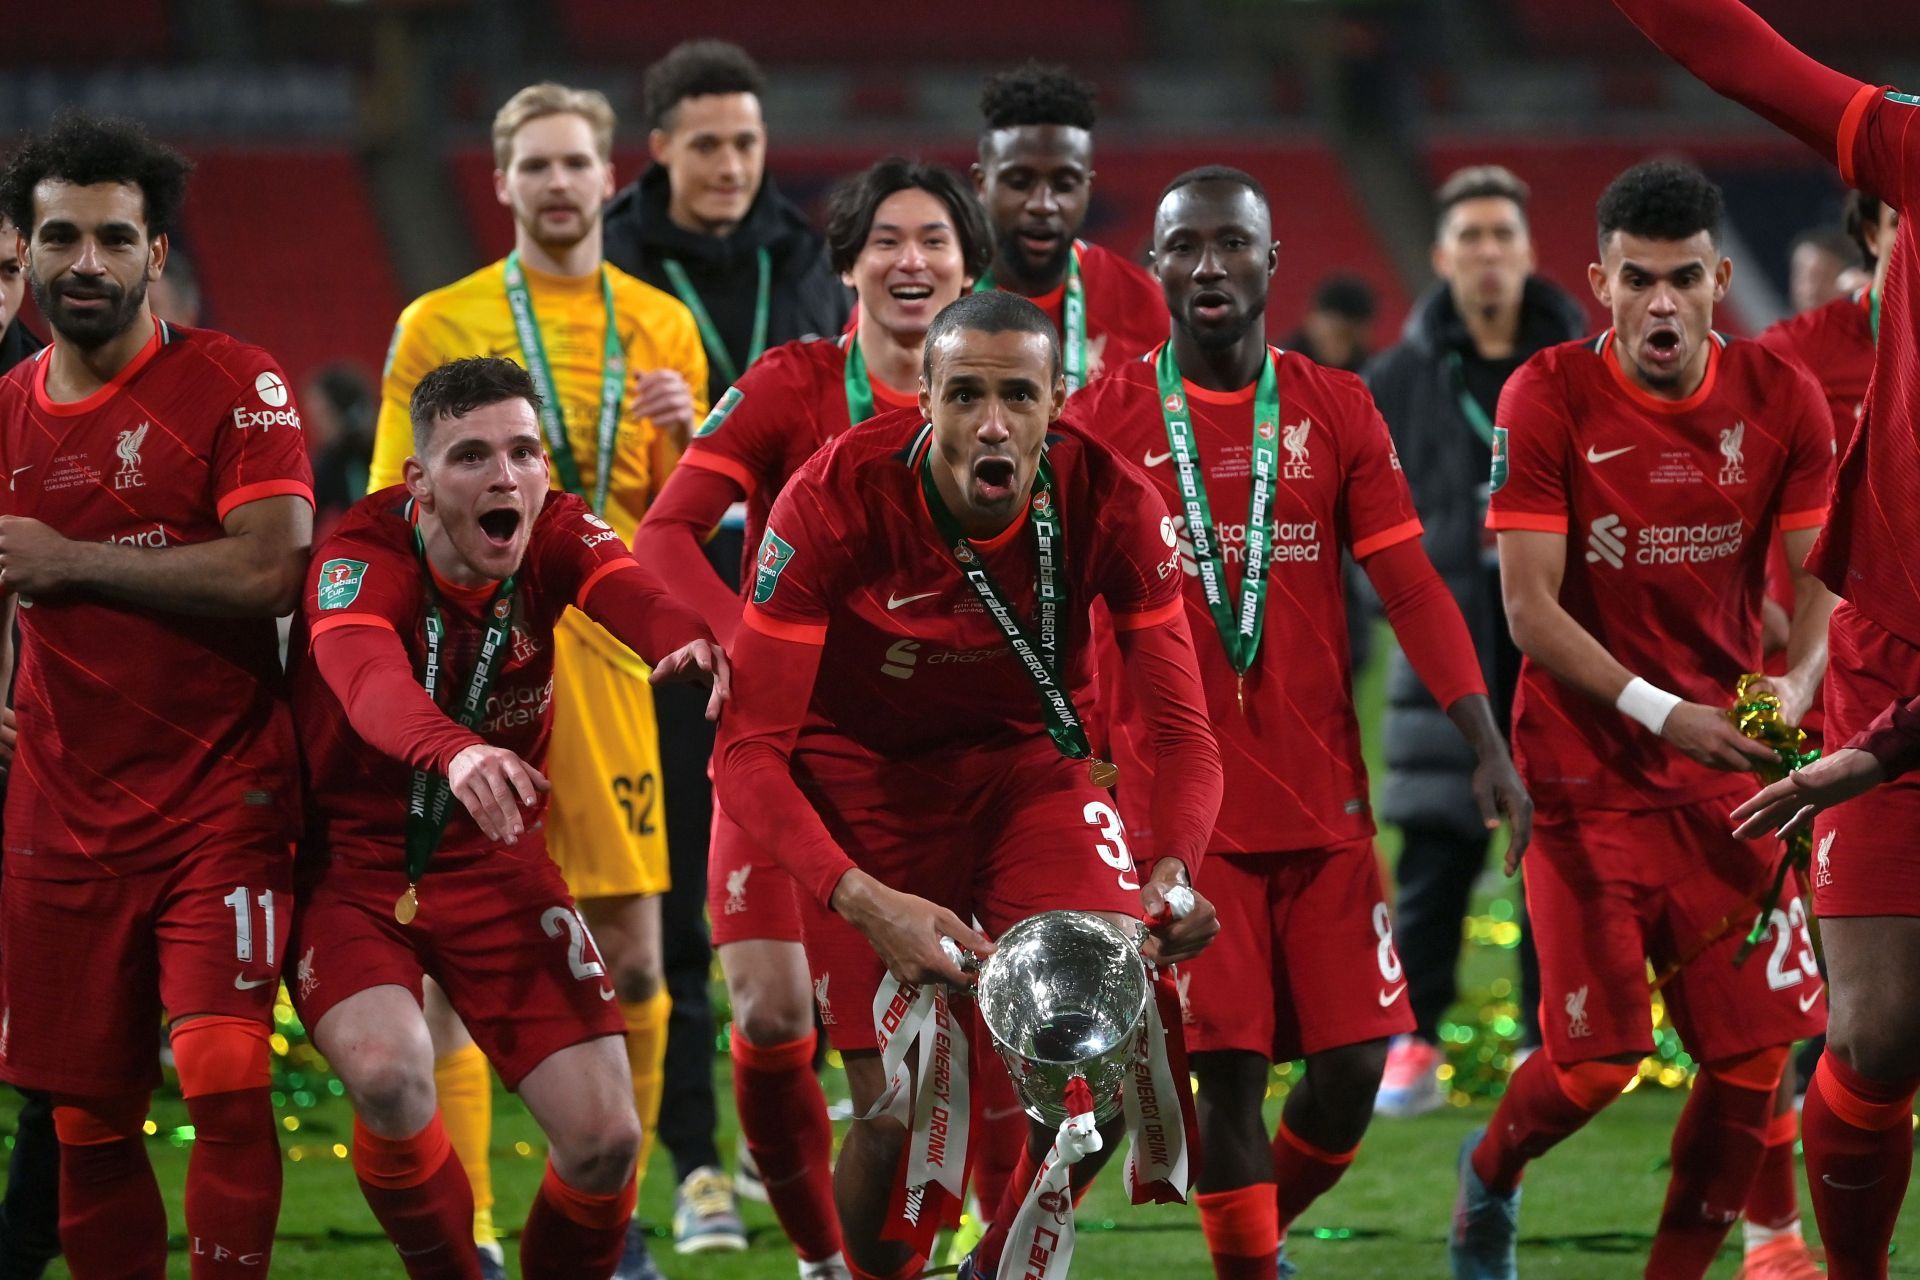 Liverpool will be looking to build on their Carabao Cup success